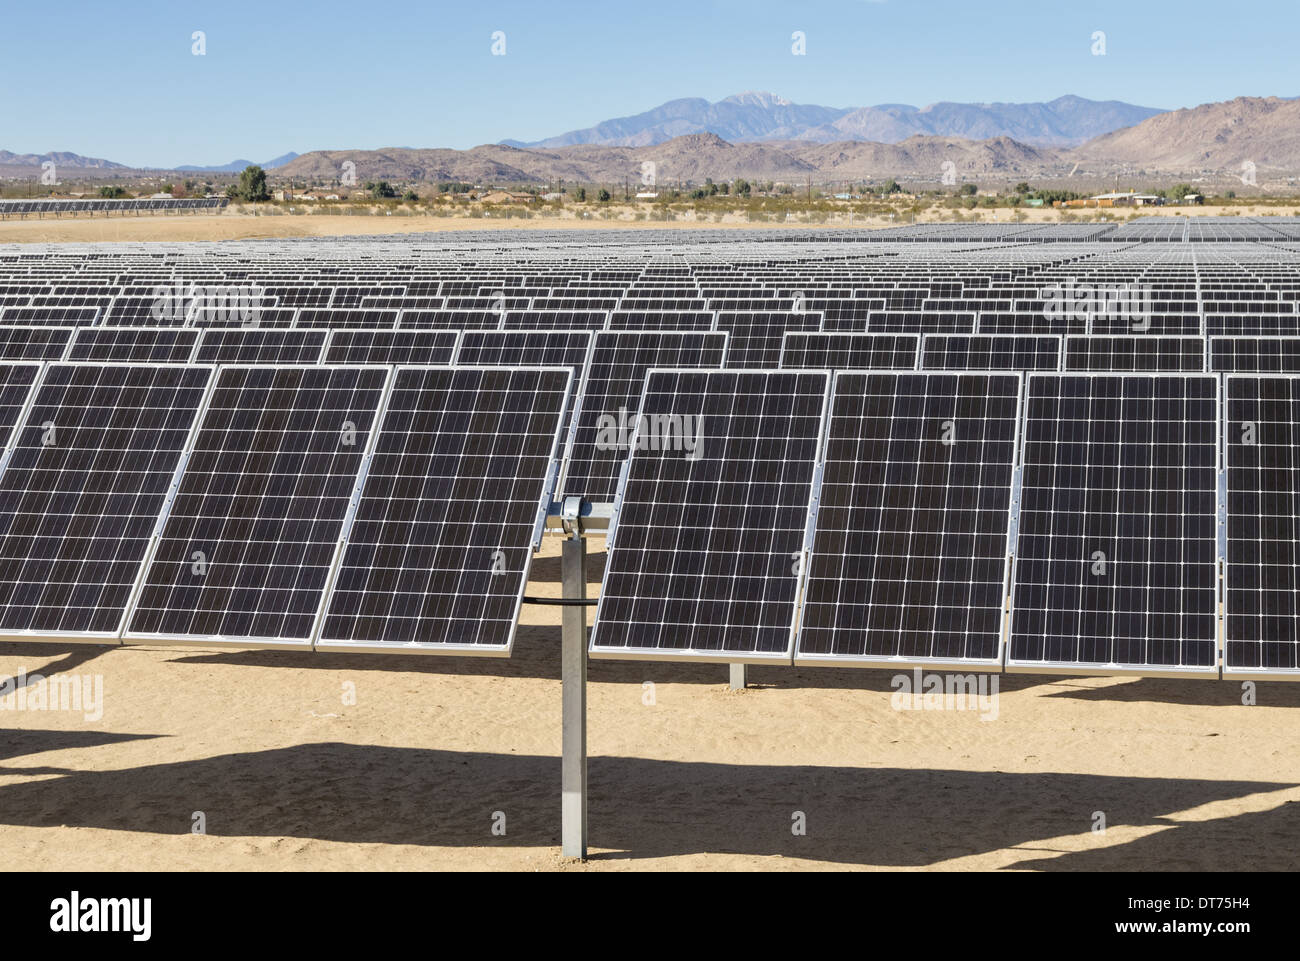 solar photovoltaic electric power plant in the Mojave desert of California Stock Photo